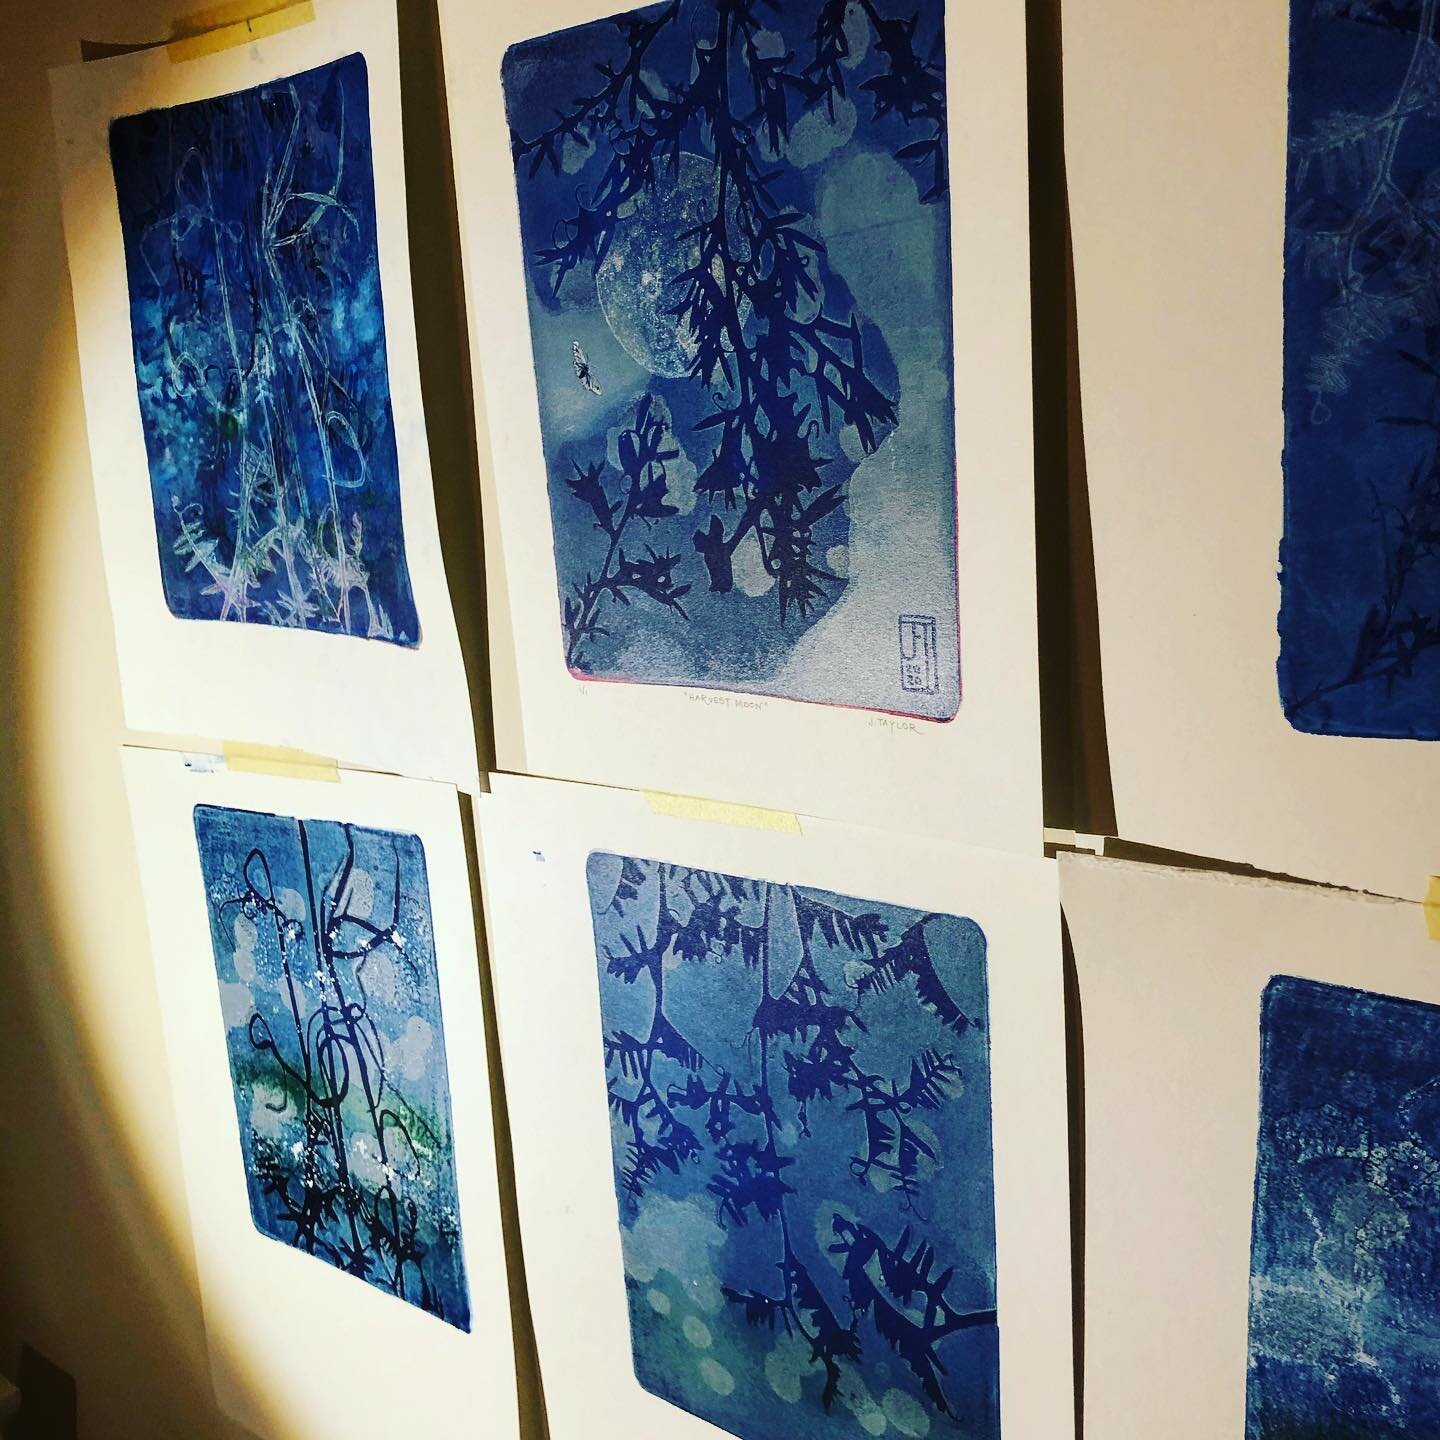 I spend so much time working at night that I decided it was time to honour those dark hours. The hours that give me still space in which to create. And all the things that fill them... crickets&rsquo; shrill, moon and stars, the indigo sky and dreams